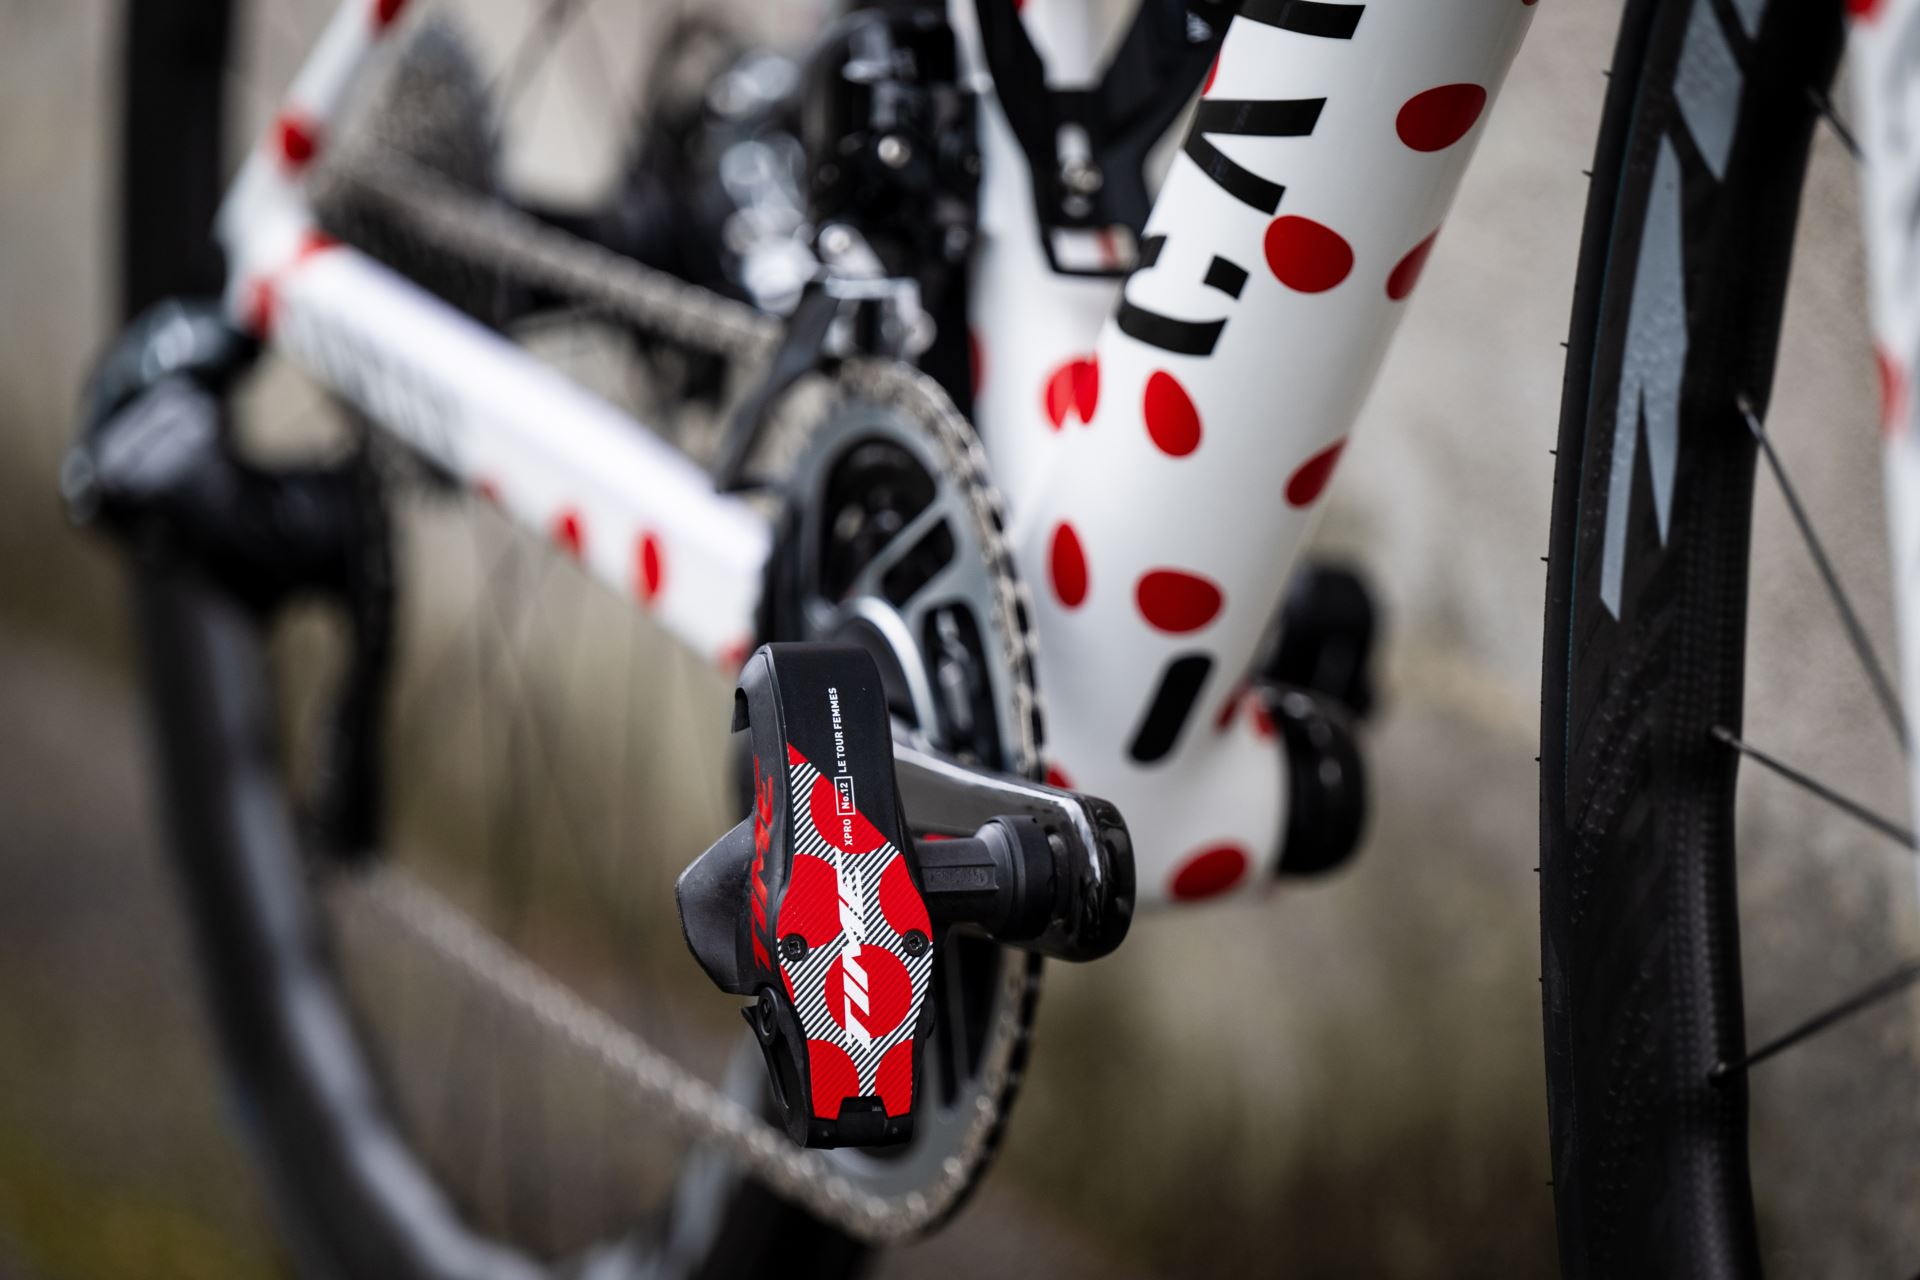 Kasia Niewiadoma's Canyon with RED eTap AXS